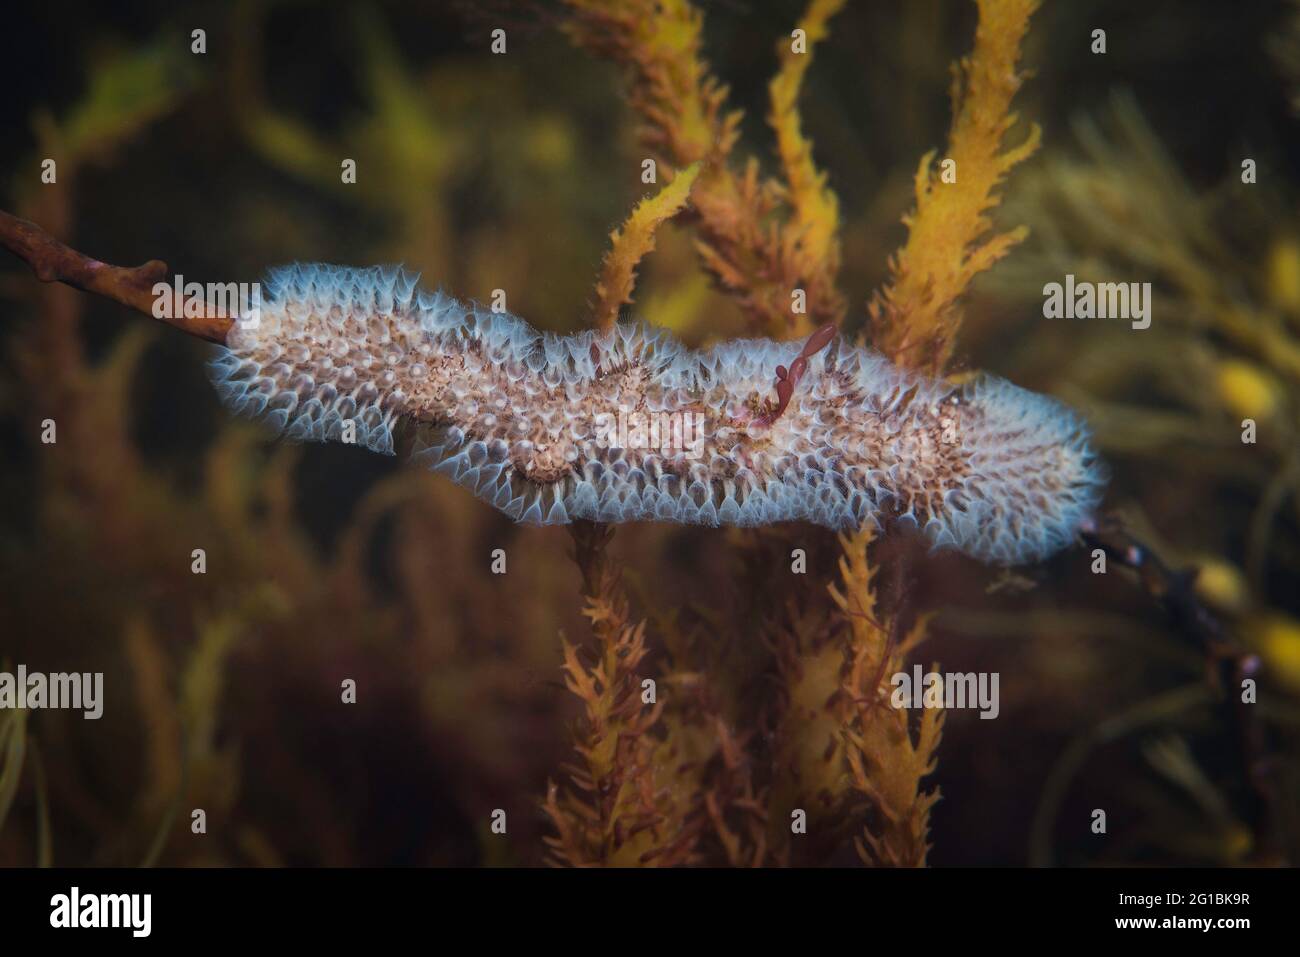 A colony of a Bryozoan species growing on a piece of seaweed. Channel Islands, UK. Stock Photo